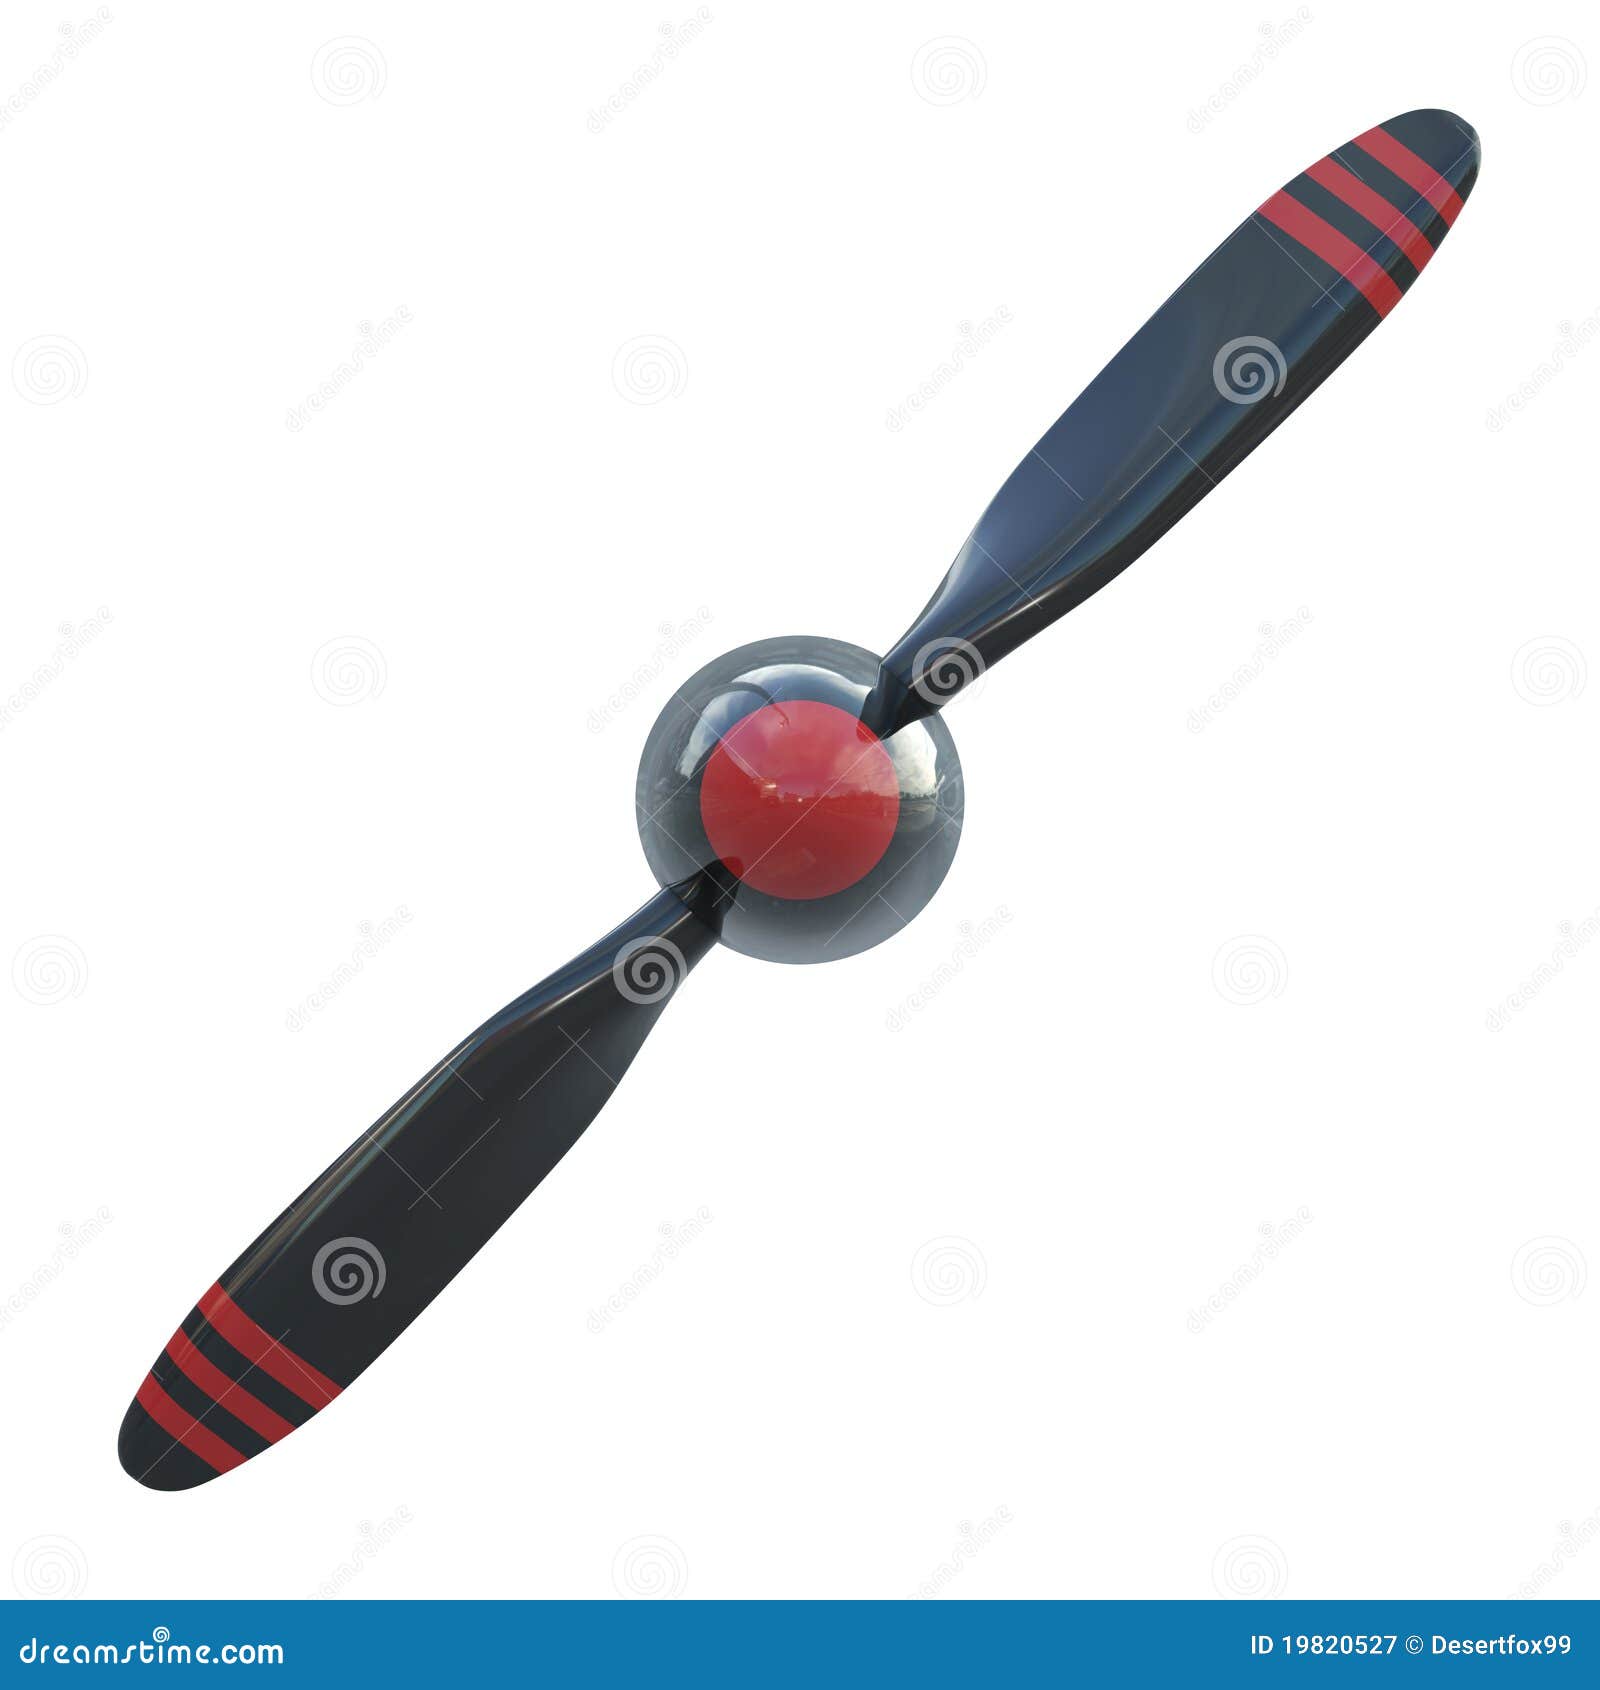 plane propeller with 2 blades